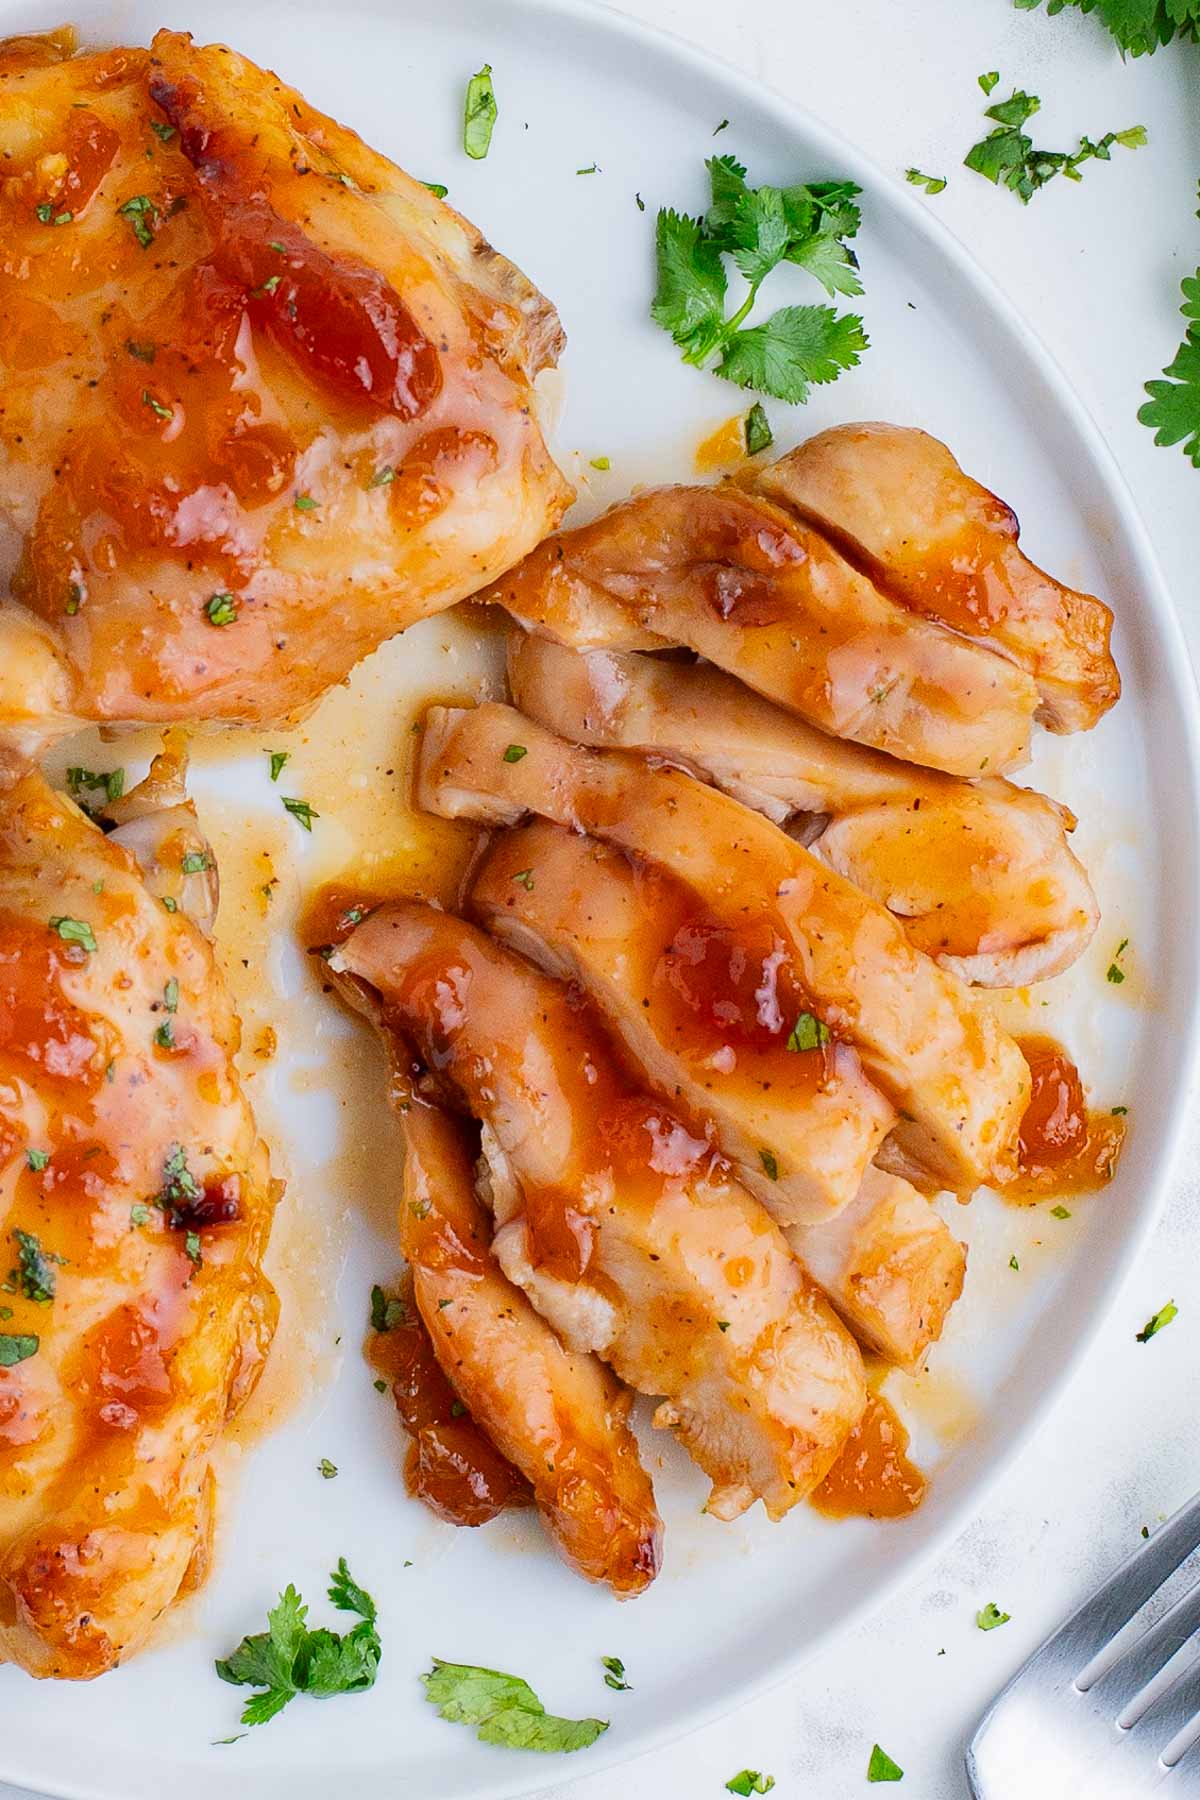 Chicken thighs cooked in an apricot sauce are sliced before serving.